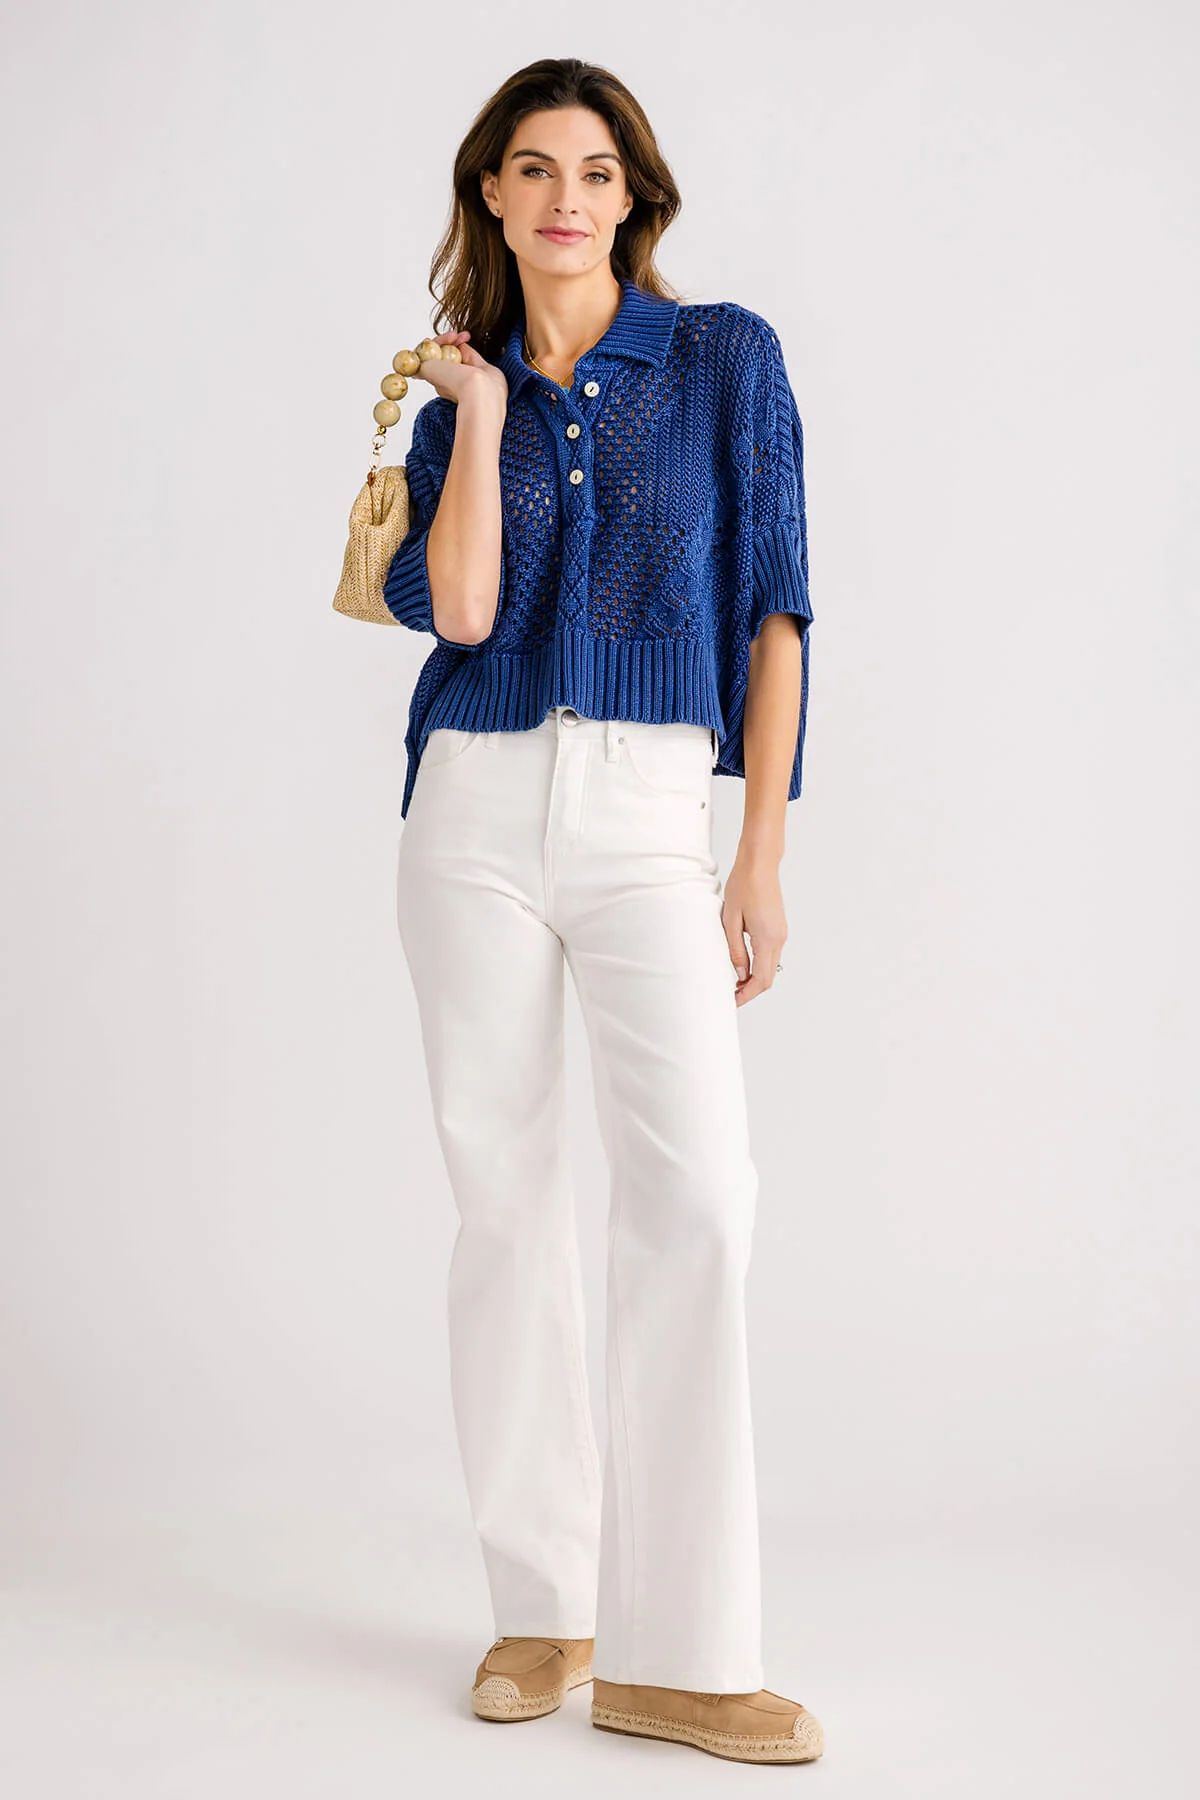 Free People To The Point Crochet Polo | Social Threads